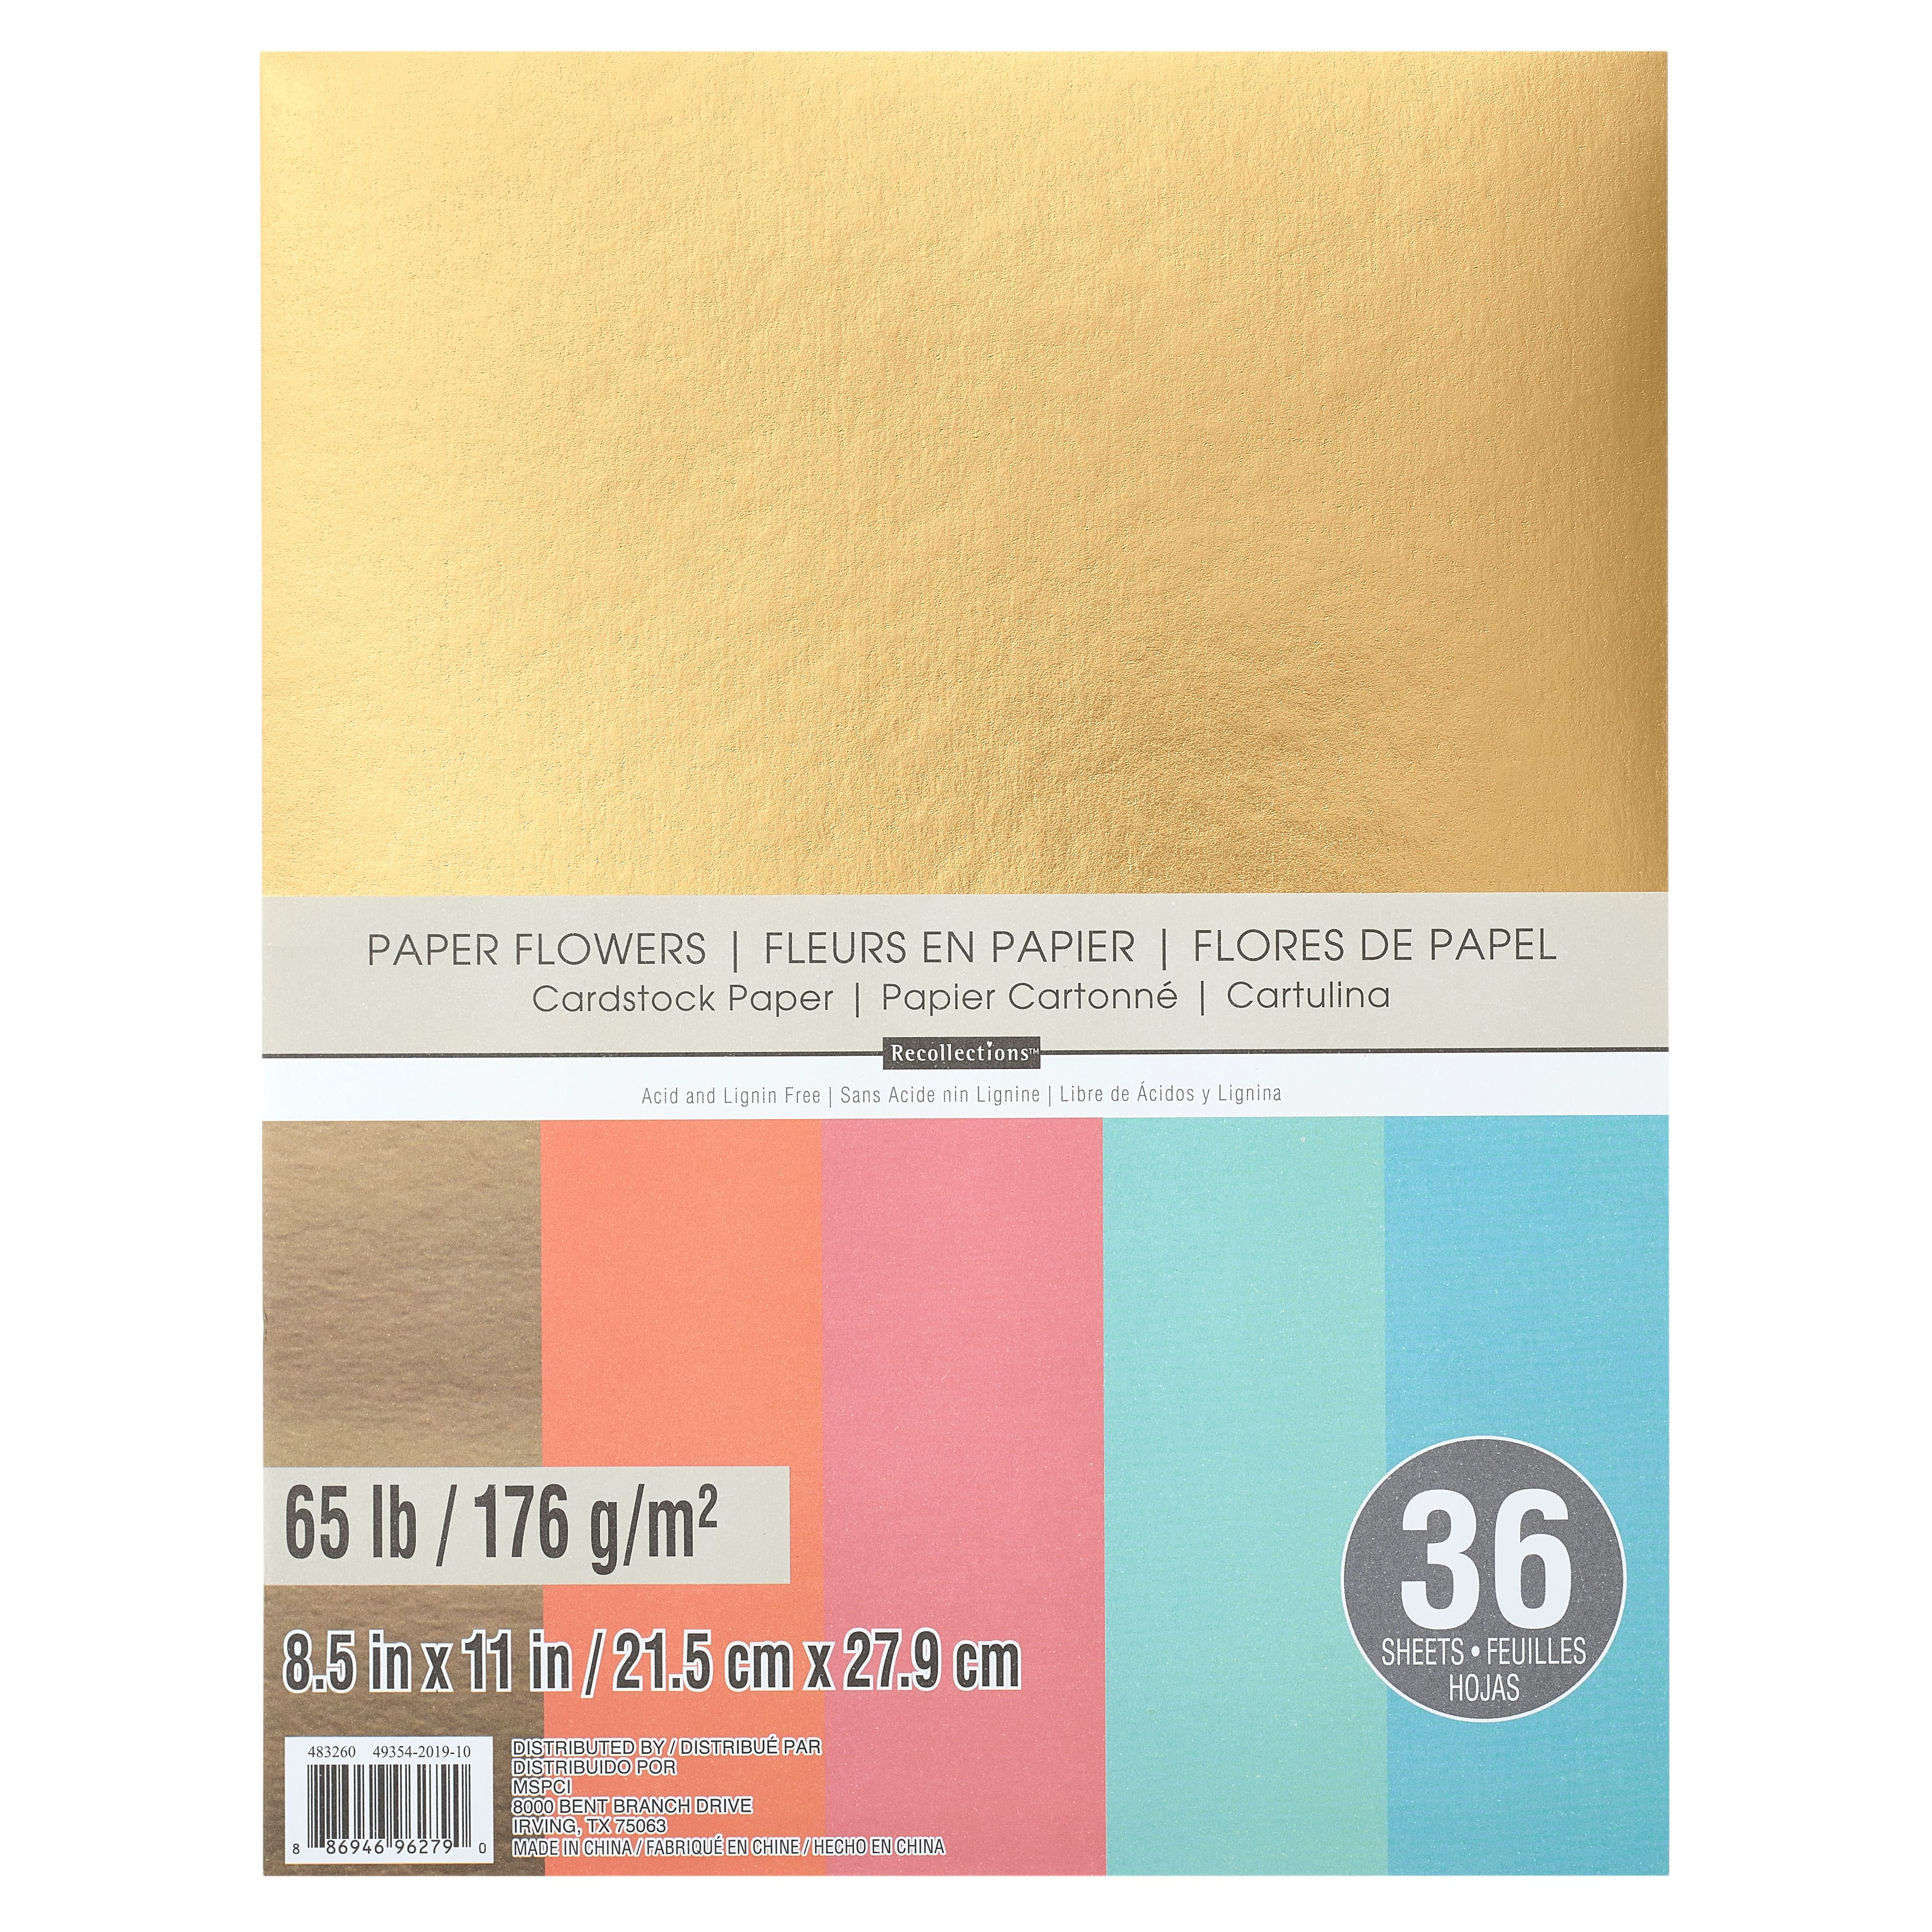 Paper Accents Cardstock Variety Pack 5x 7 Rainbow 65lb Modern Hues 250pc